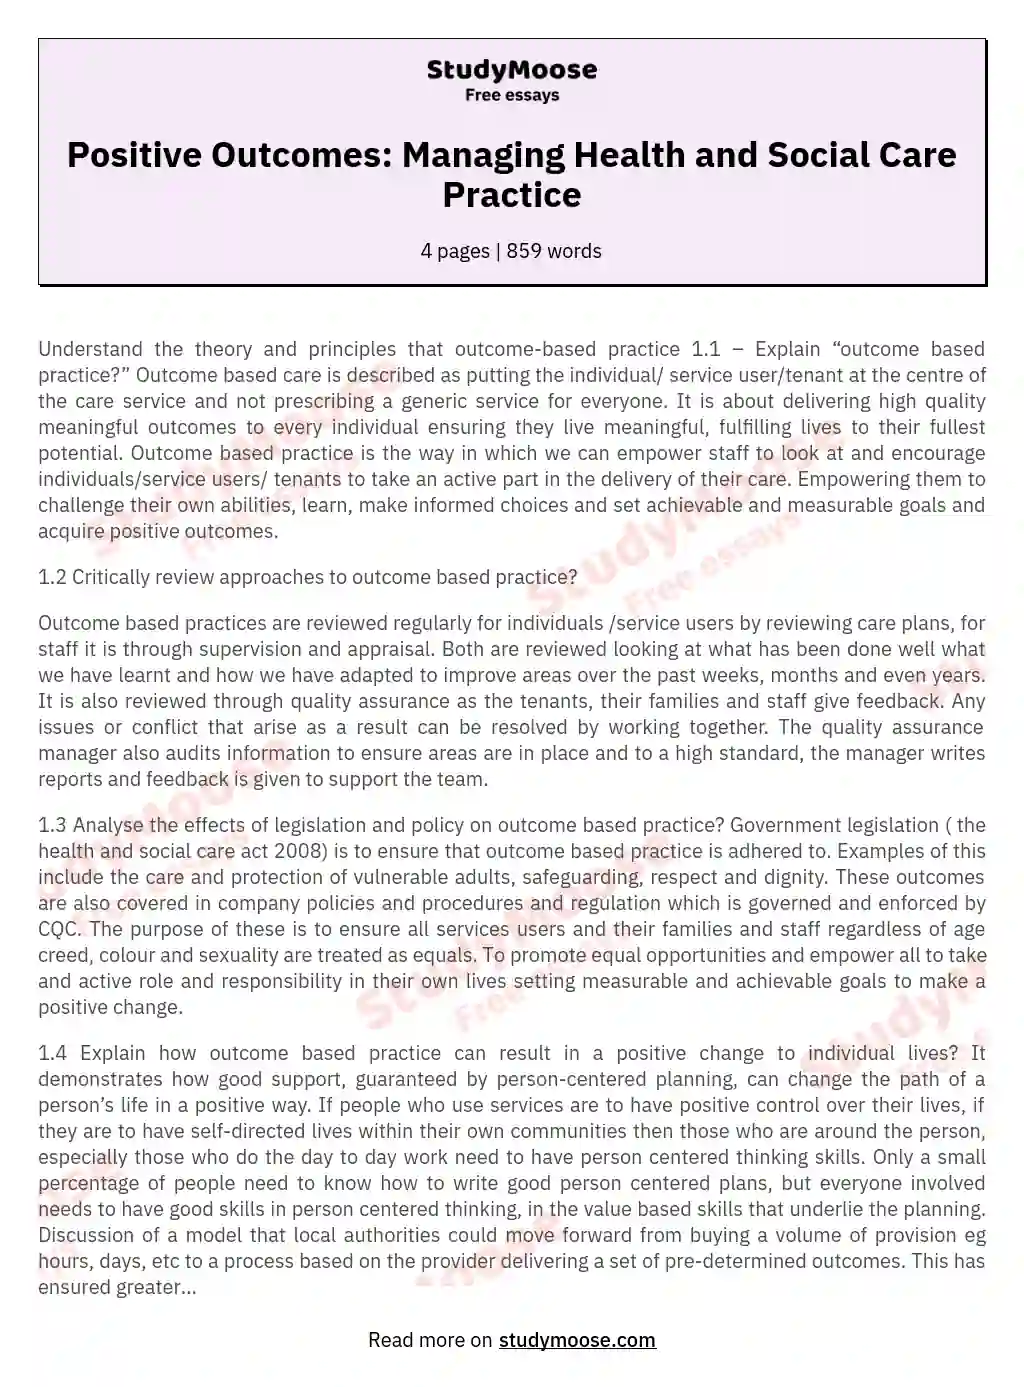 Positive Outcomes: Managing Health and Social Care Practice essay